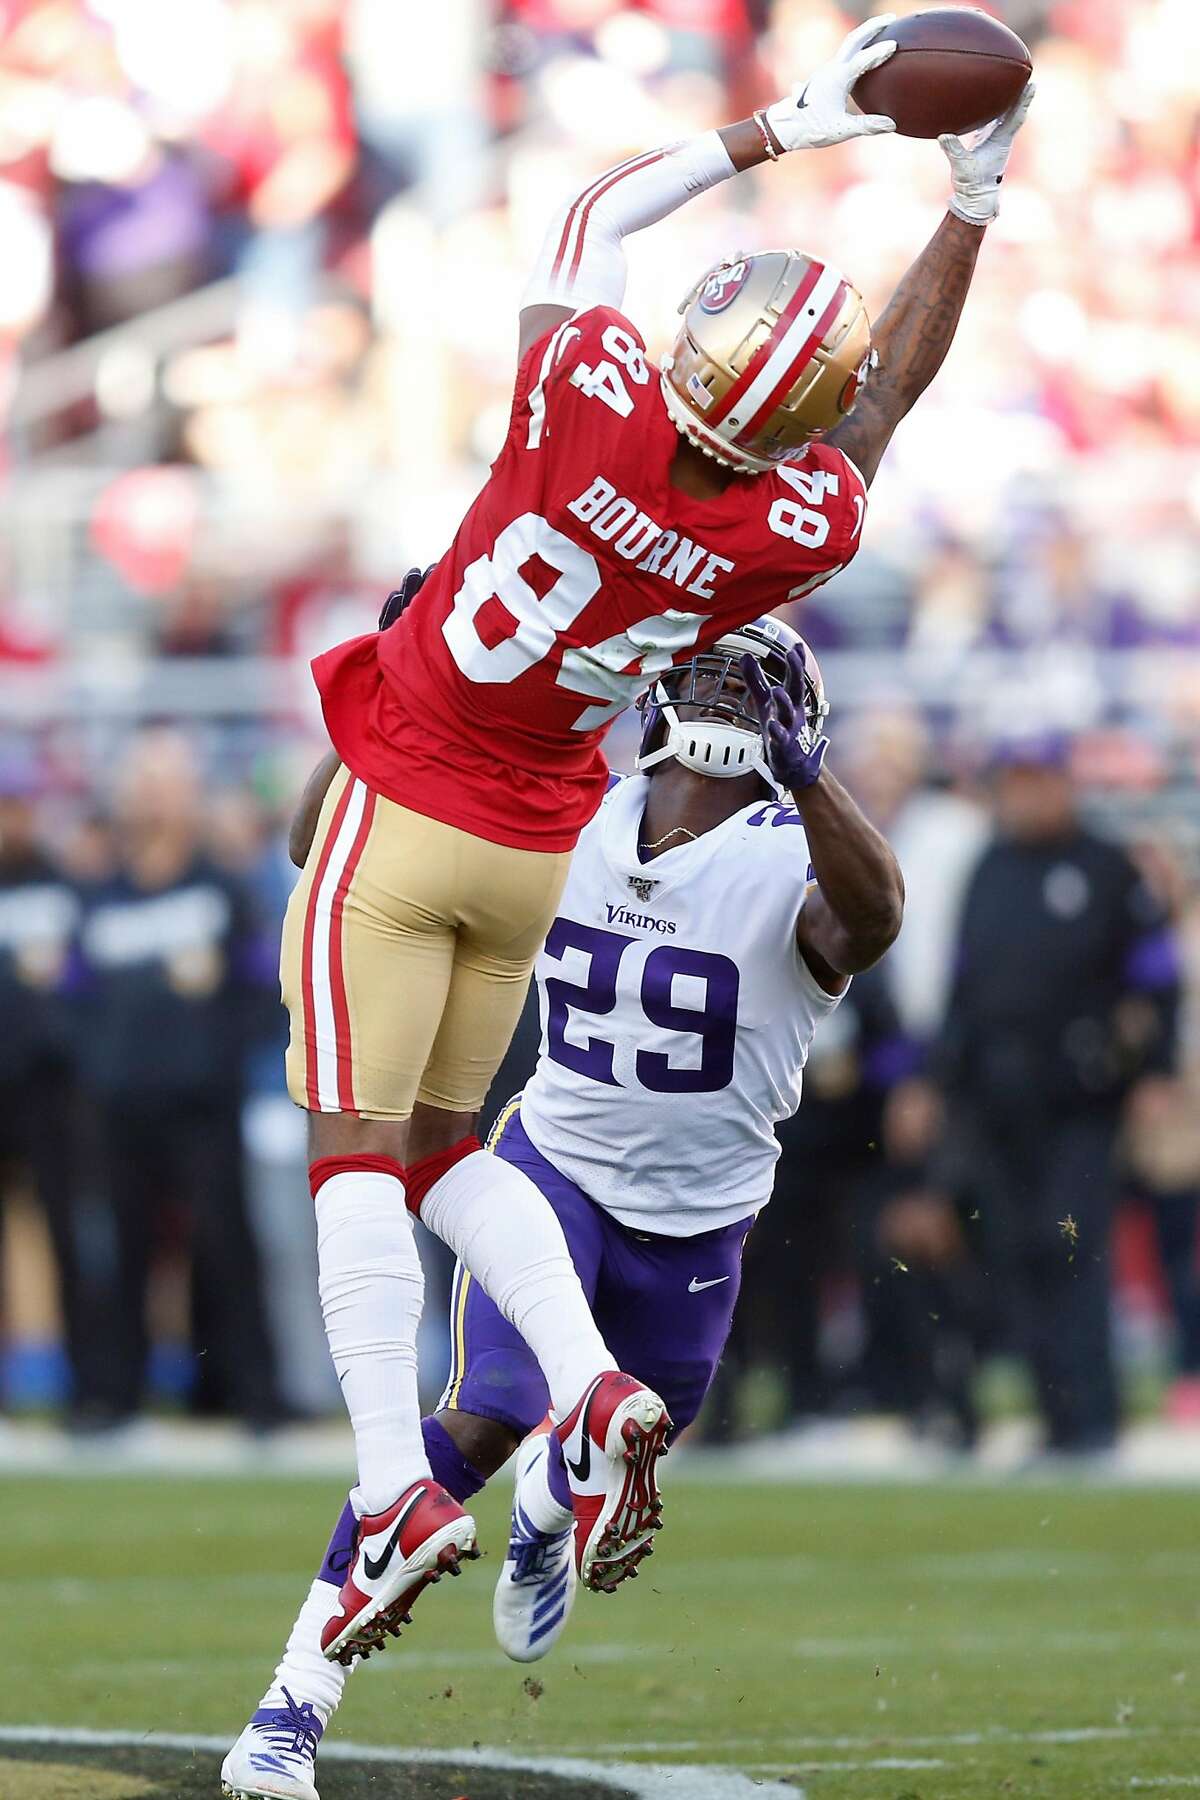 SANTA CLARA, CALIFORNIA - JANUARY 11: Kendrick Bourne #84 of the San Francisco 49ers makes a catch against Xavier Rhodes #29 of the Minnesota Vikings during the NFC Divisional Round Playoff game at Levi's Stadium on January 11, 2020 in Santa Clara, California. (Photo by Lachlan Cunningham/Getty Images)